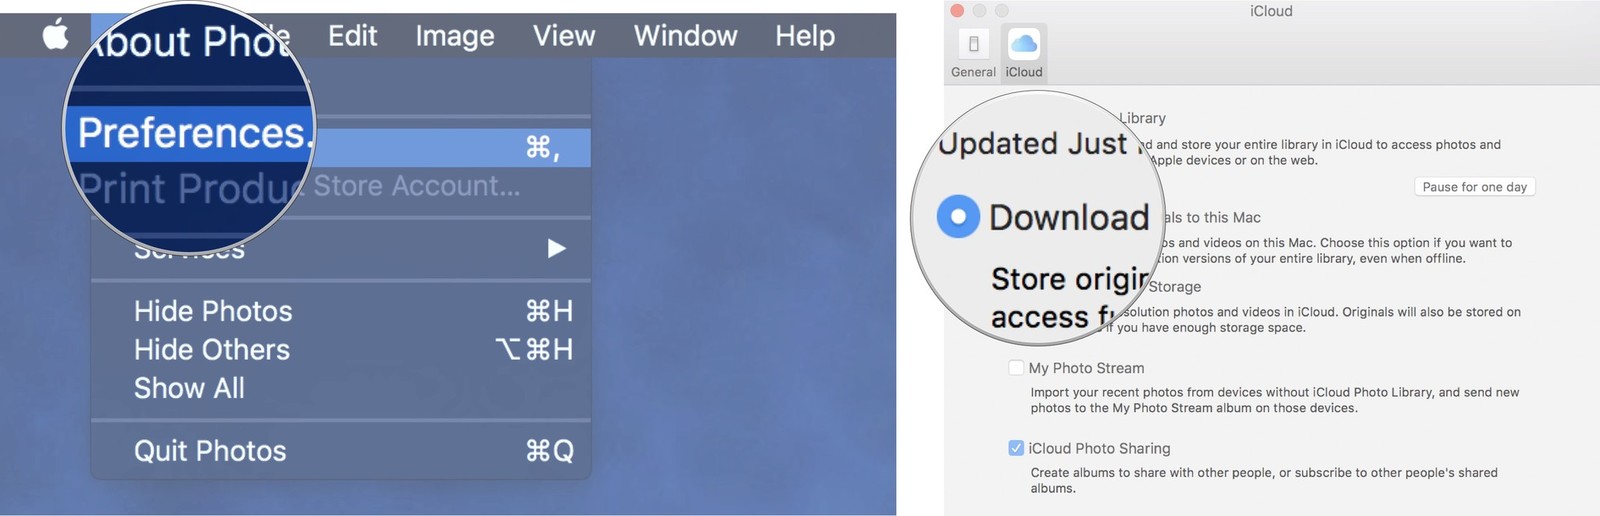 Download Icloud Pictures To Mac